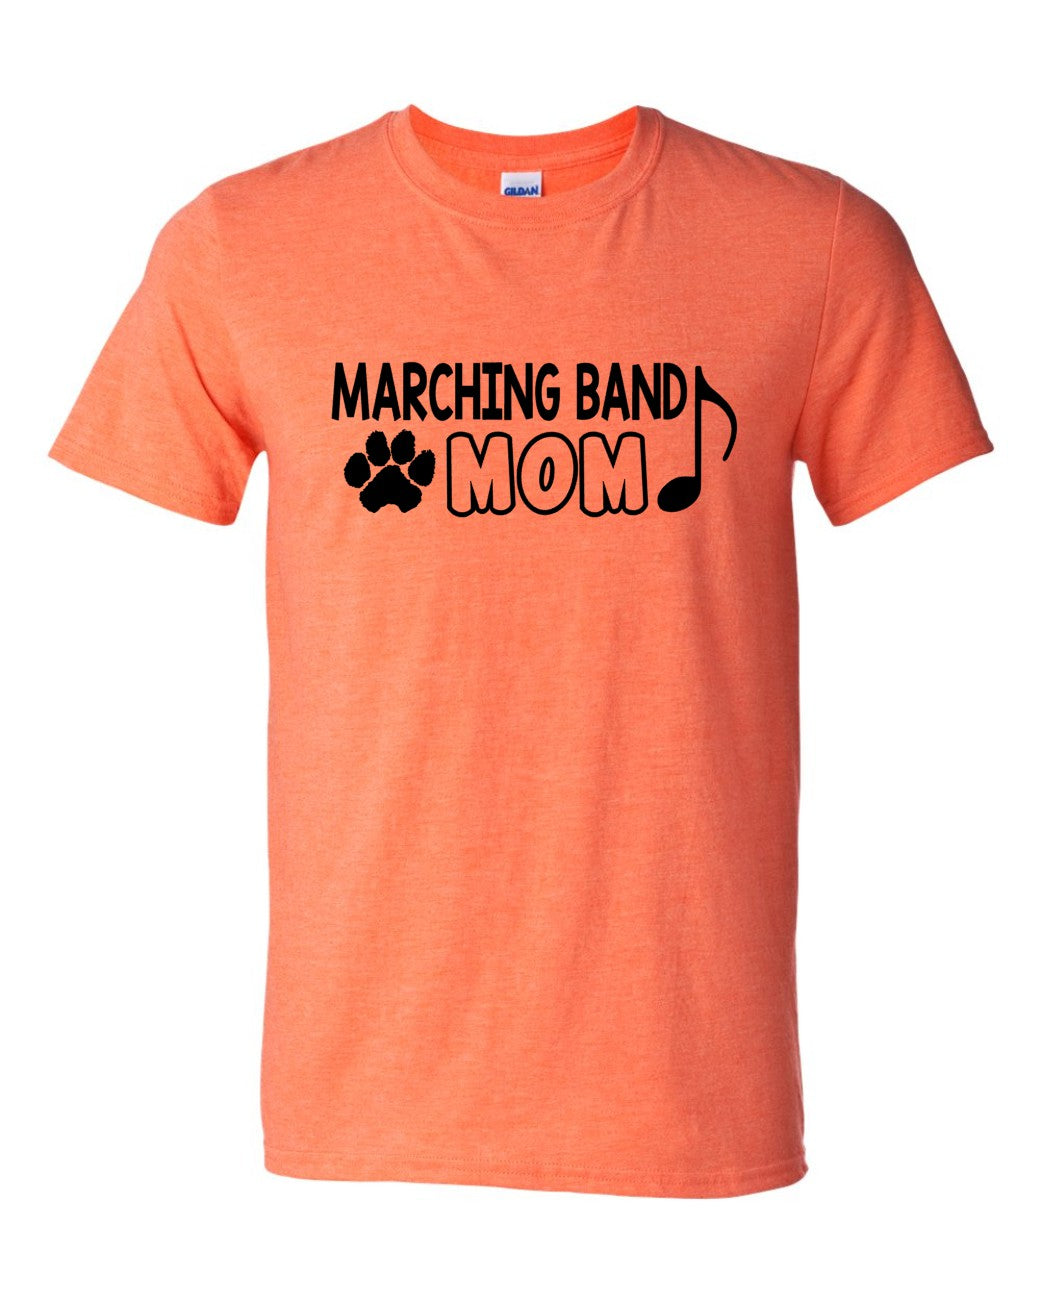 Marching Band Mom Tee